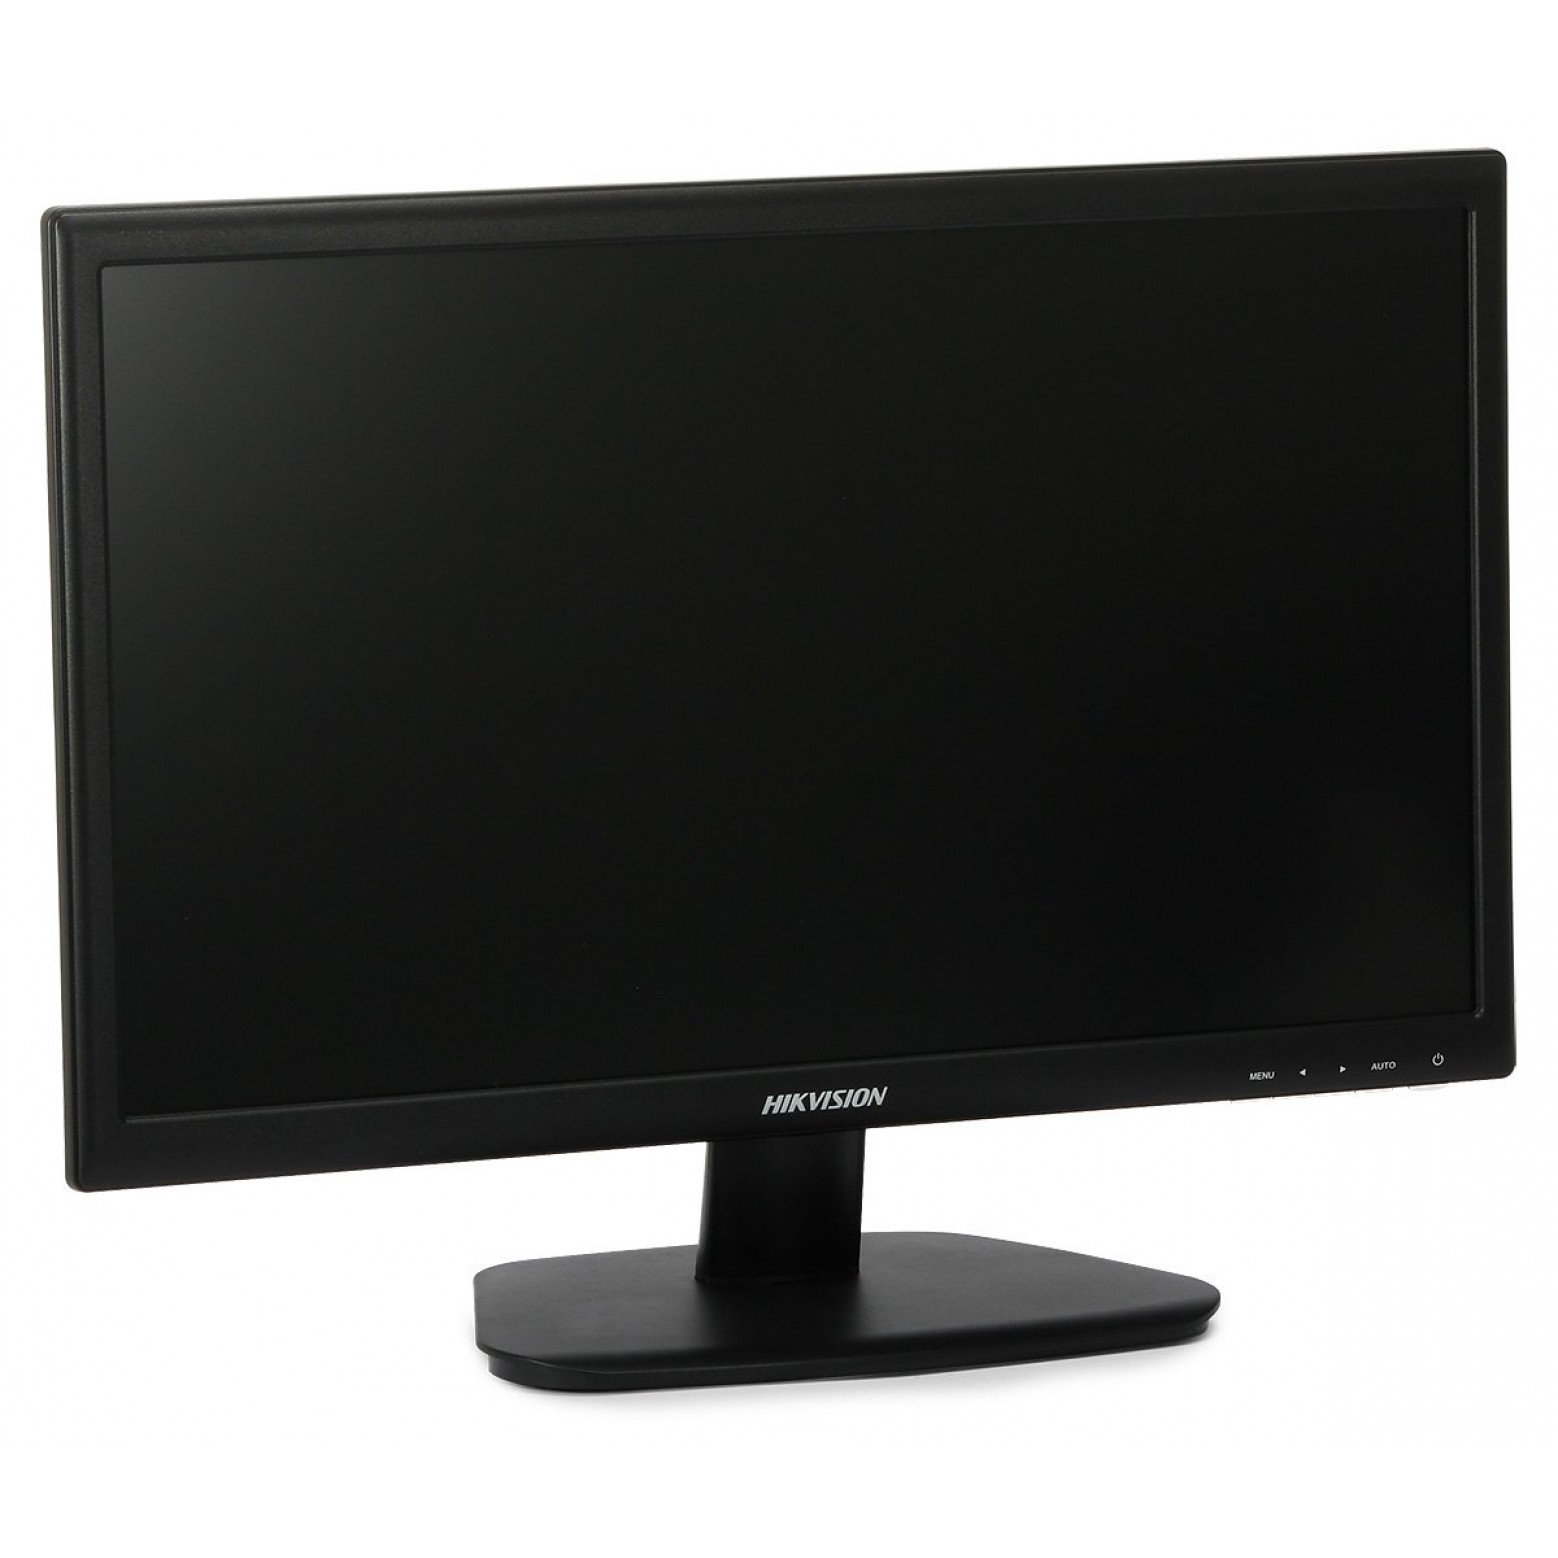 Hikvision DS-D5022FC 21.5 LED monitor